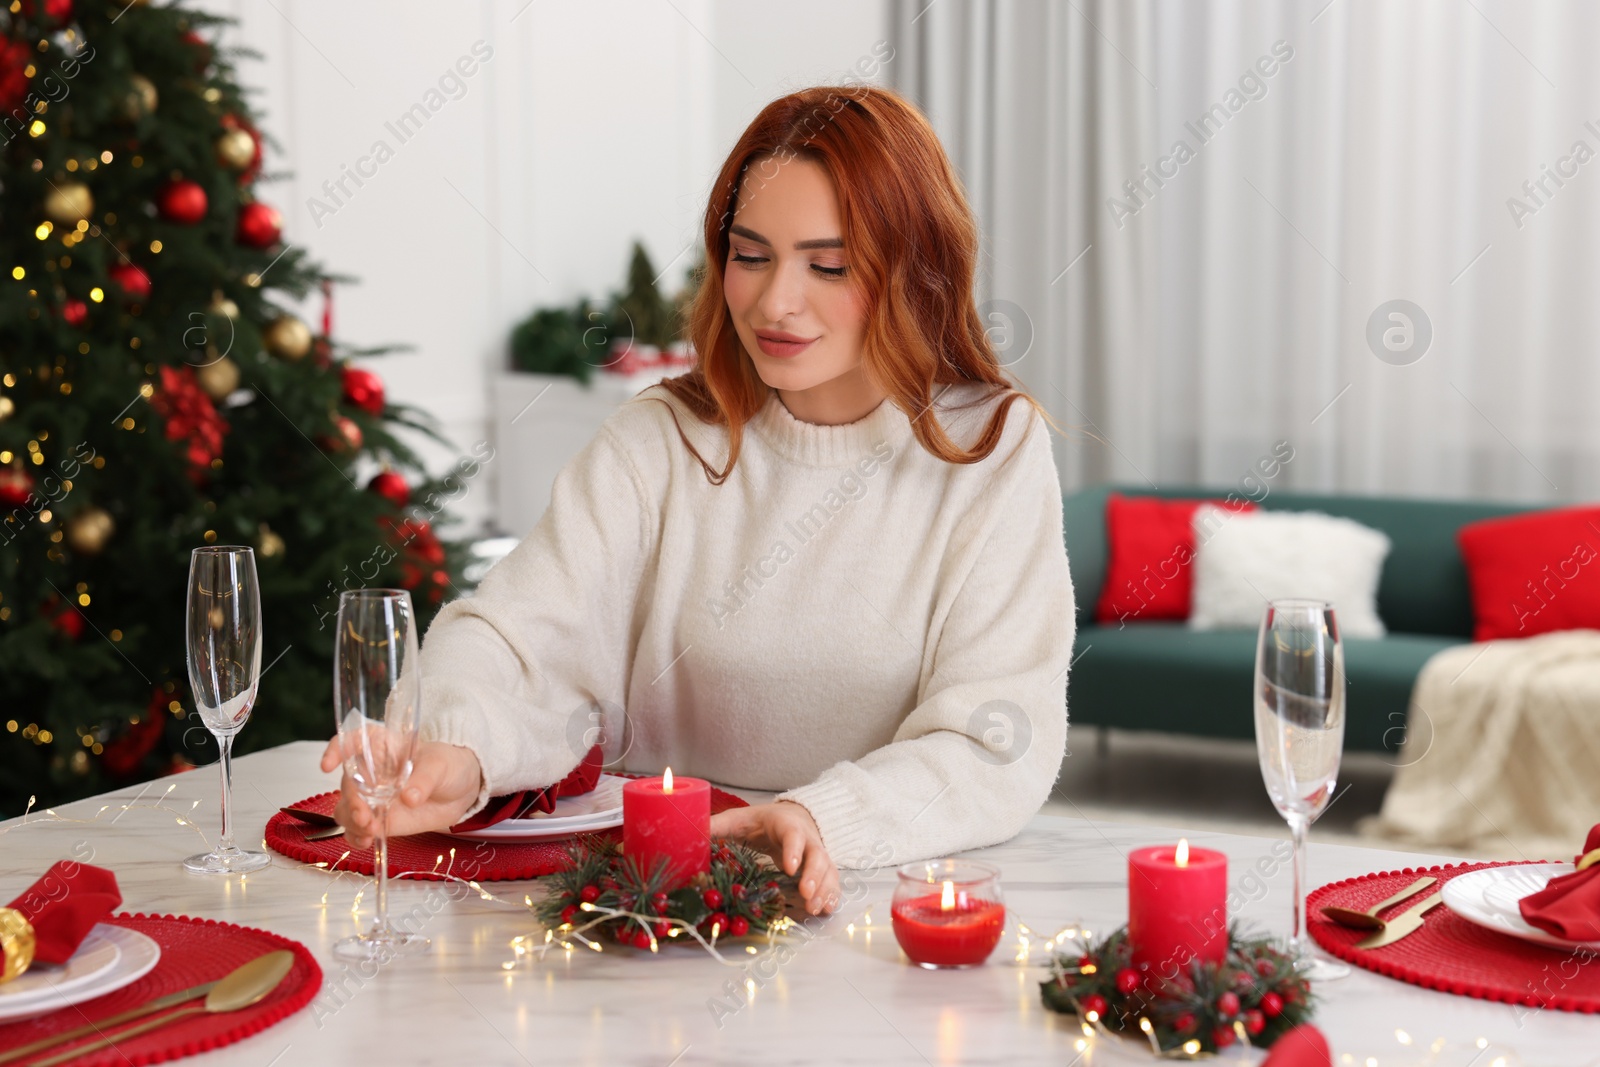 Photo of Beautiful young woman setting table in room decorated for Christmas